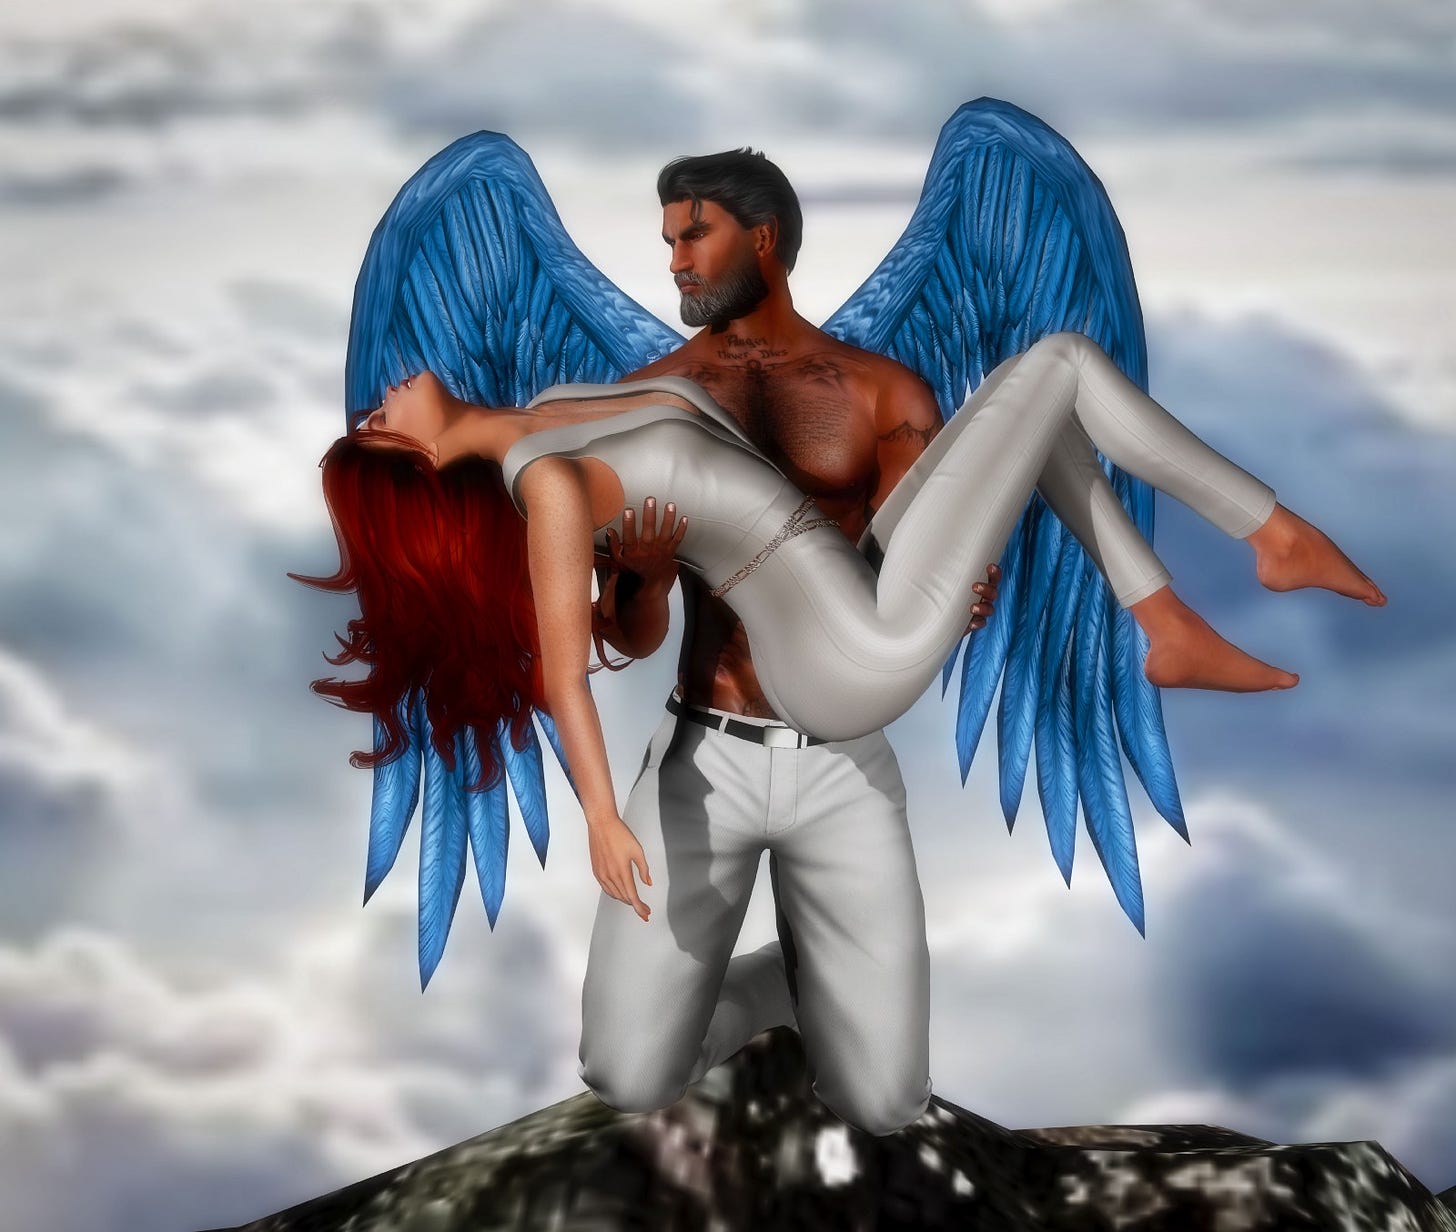 “Angel To The Rescue” — Image Copyright © 2022 If-What-If. All Rights Reserved. Photographer: Poko — Flickr — https://www.flickr.com/people/poko9/